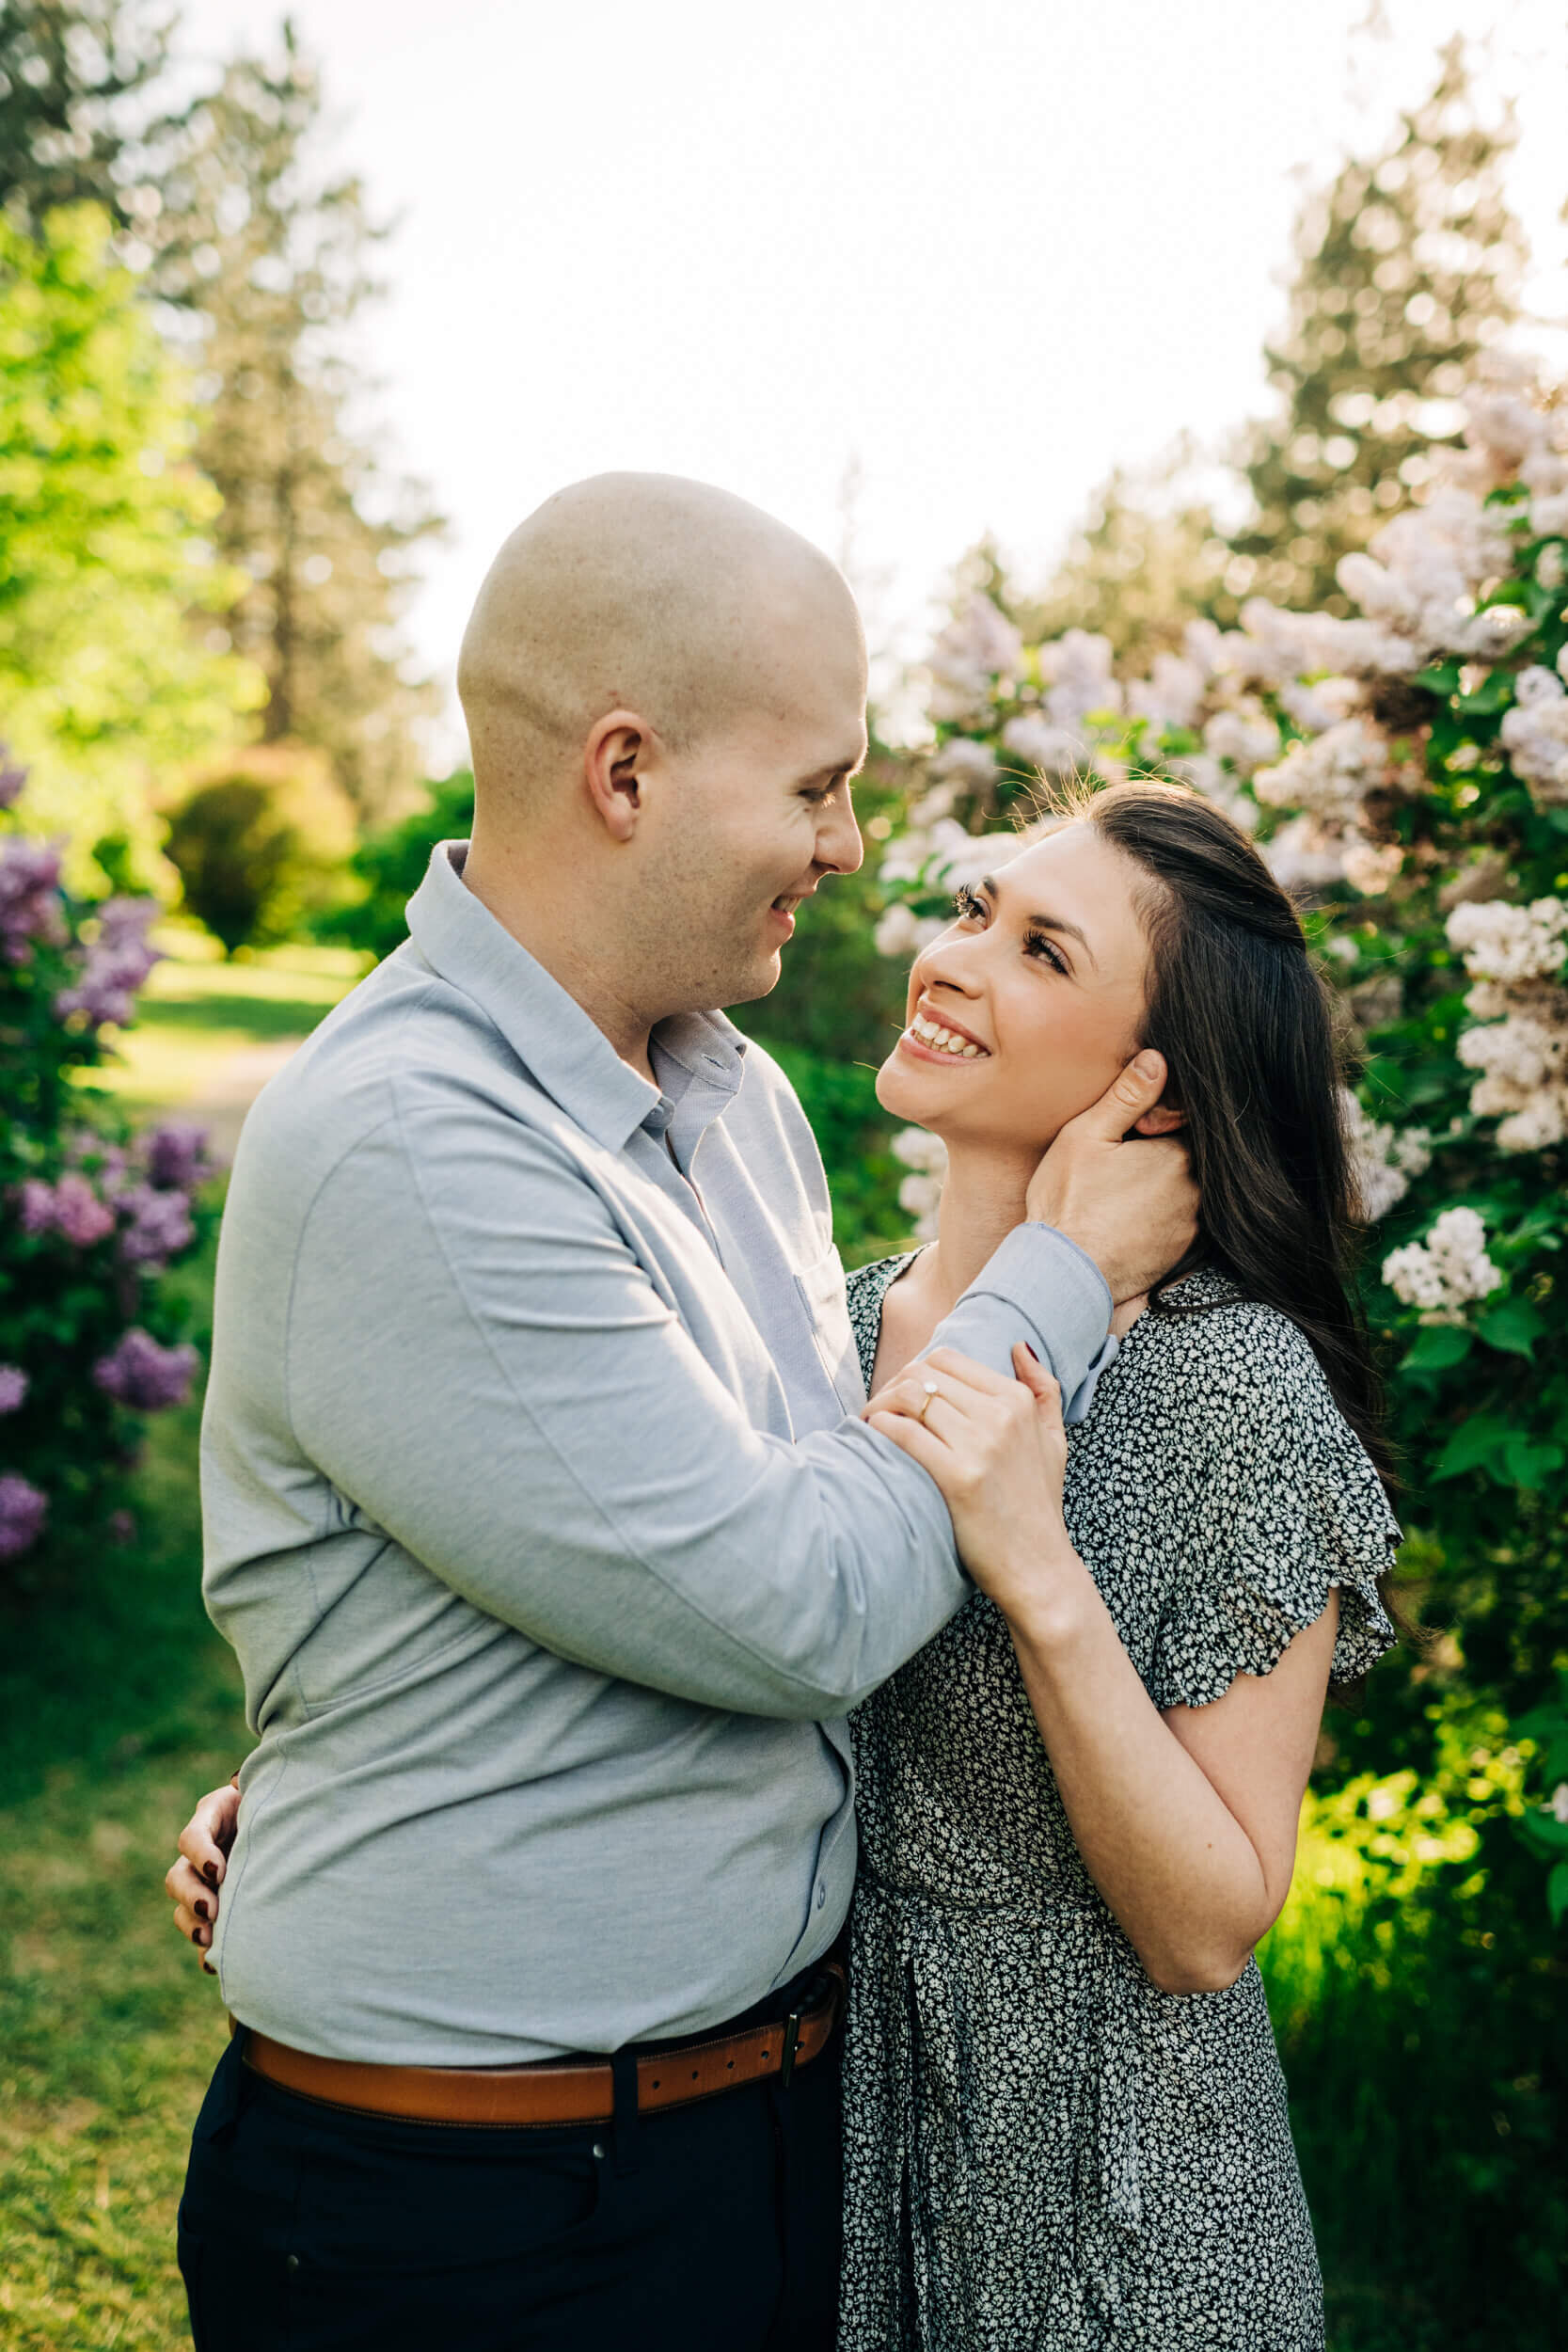 Lilac Garden Engagement Photo Session